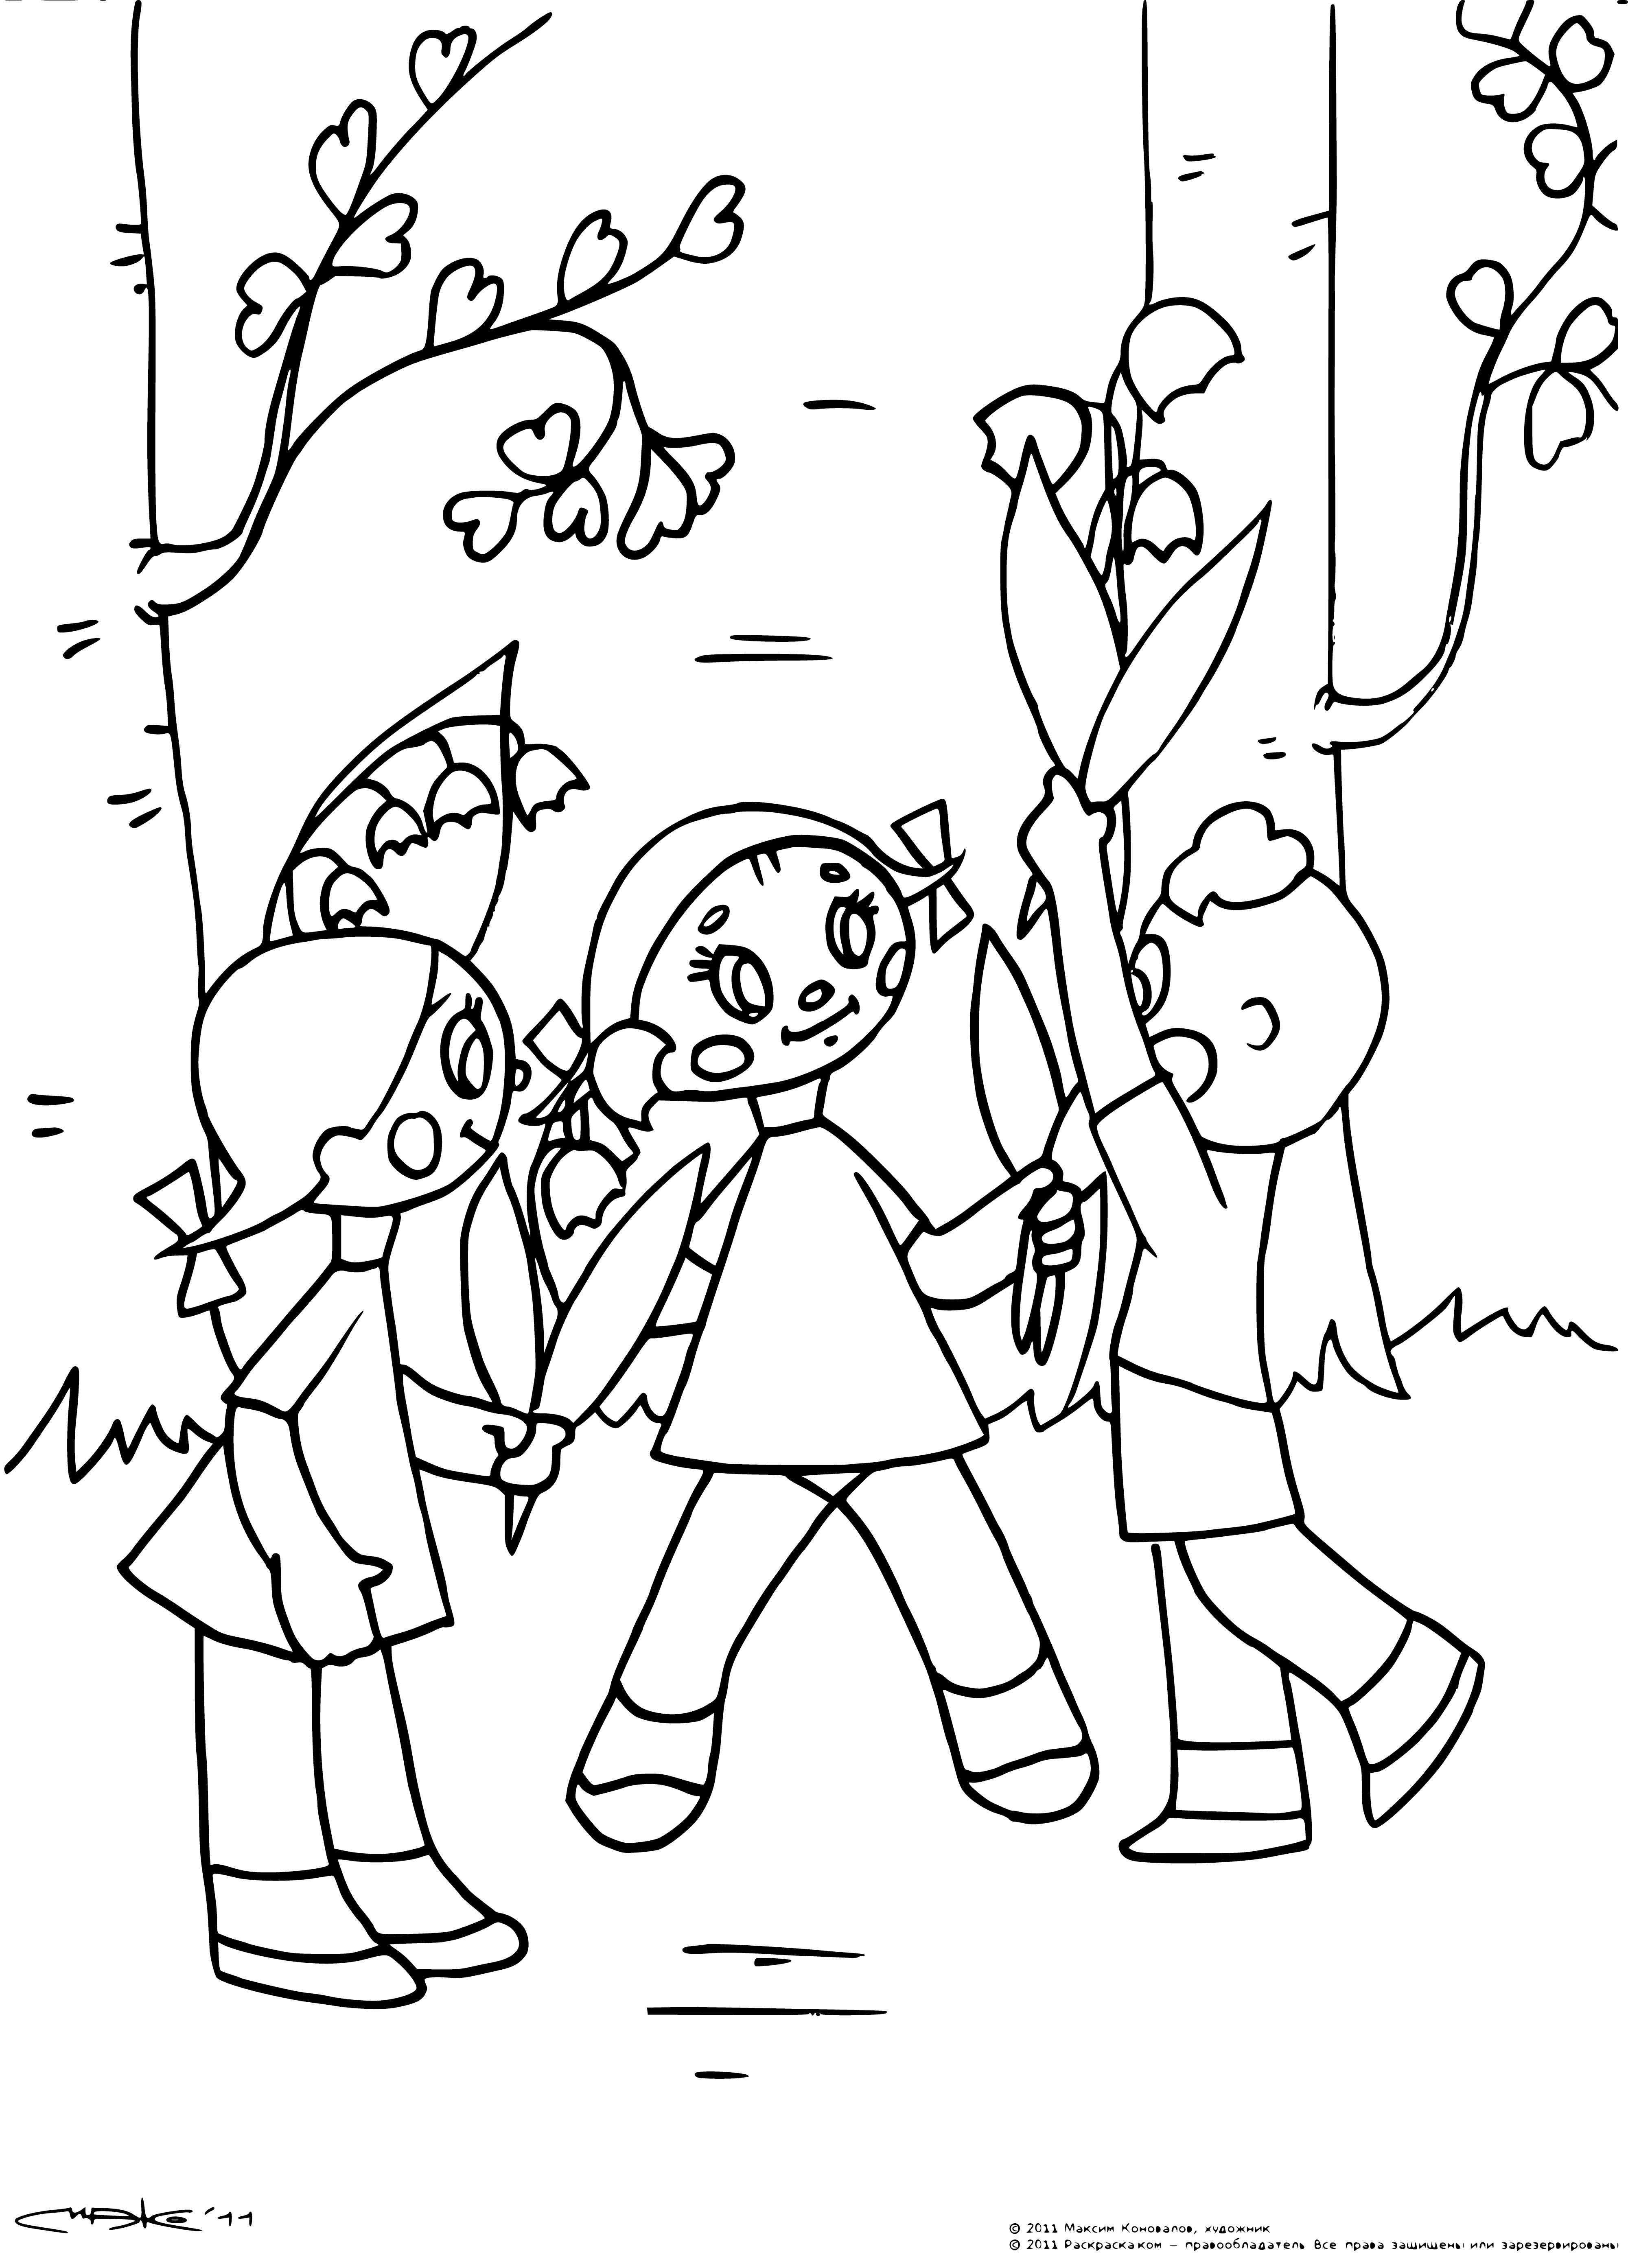 coloring page: Old loco surrounded by happy kids in the woods. Small girl sitting watching them. Ivy covers the loco.